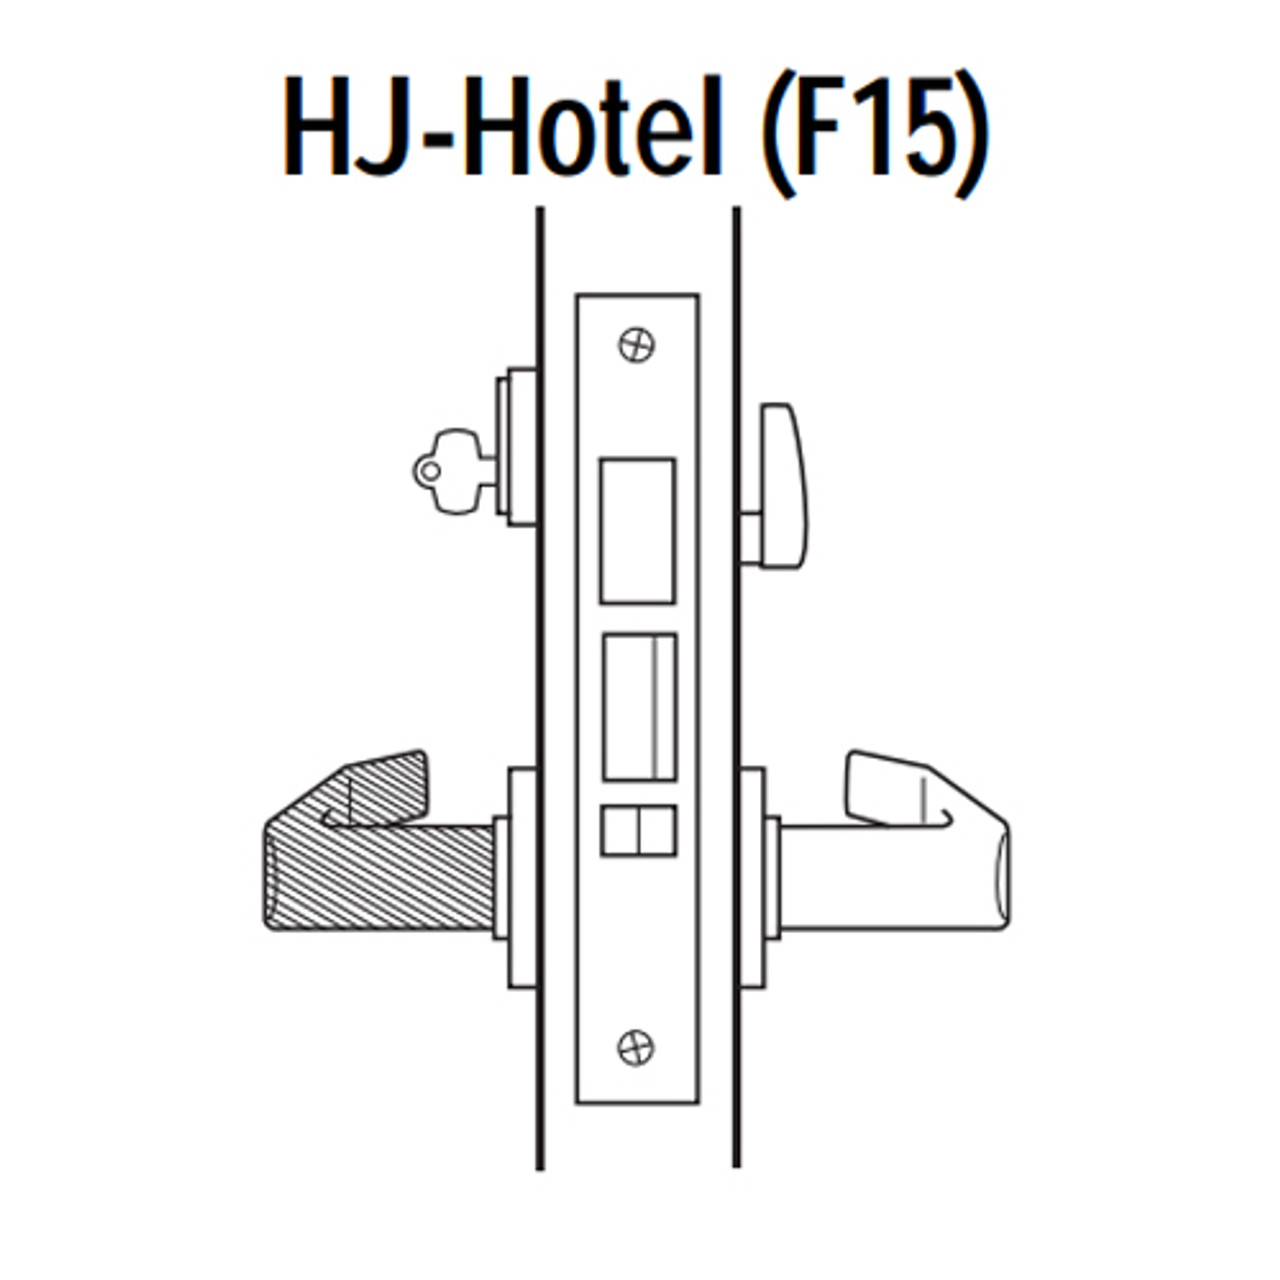 45H7HJ17RR619 Best 40H Series Hotel with Deadbolt Heavy Duty Mortise Lever Lock with Gull Wing RH in Satin Nickel